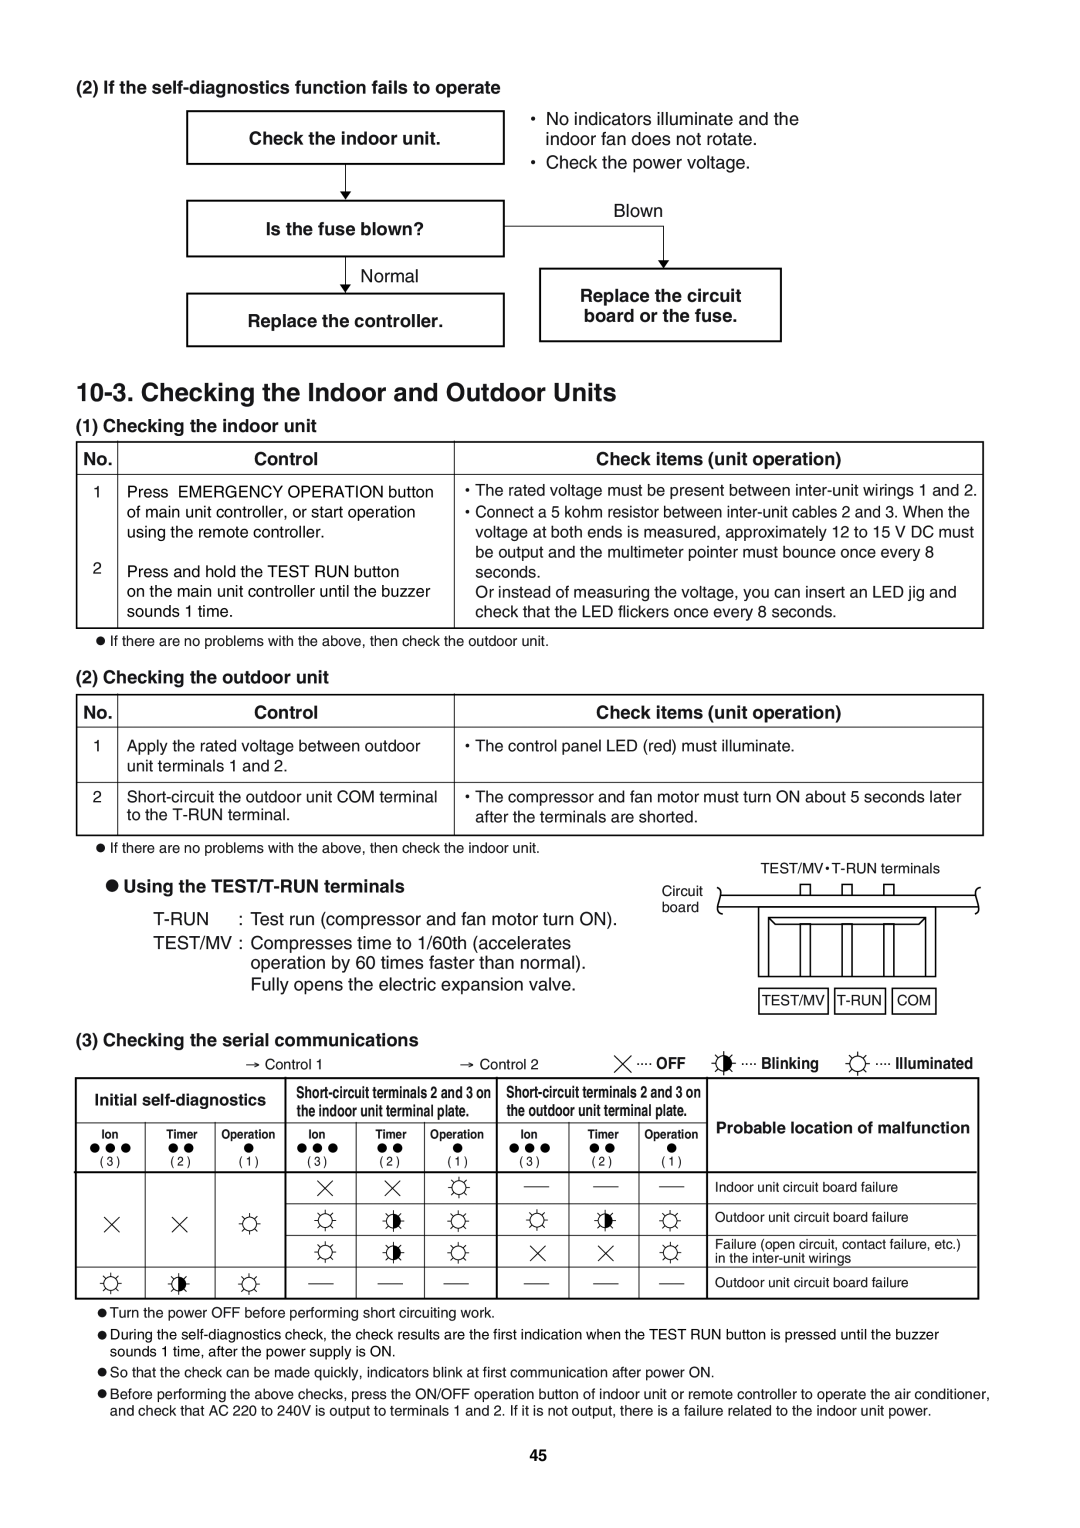 Sanyo SAP-KRV94EHDX service manual Checking the Indoor and Outdoor Units 